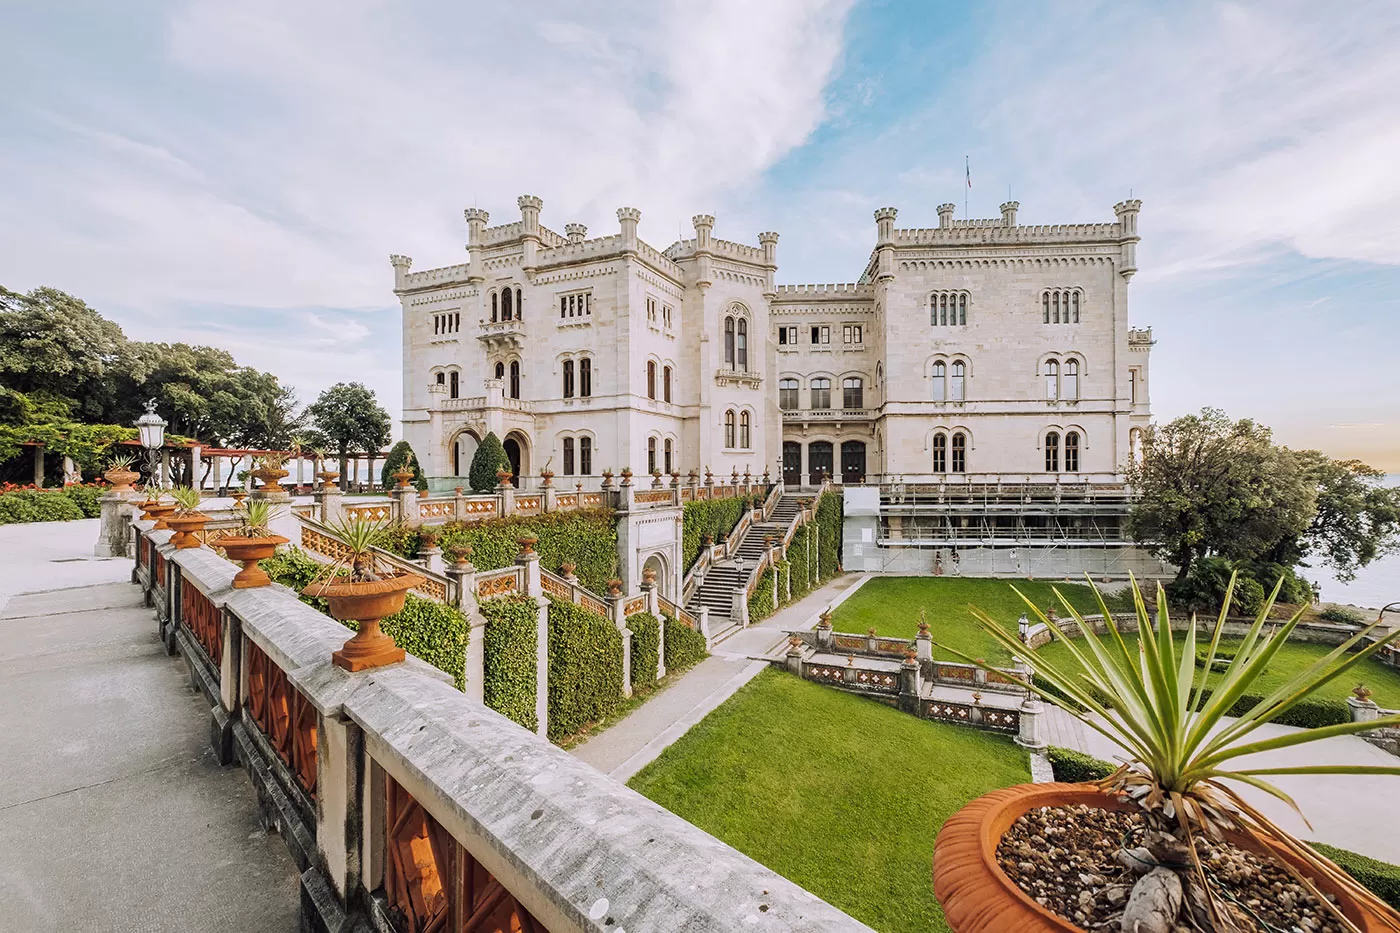 Best Things to Do in Trieste Italy - Miramare Castle - Terrace and gardens